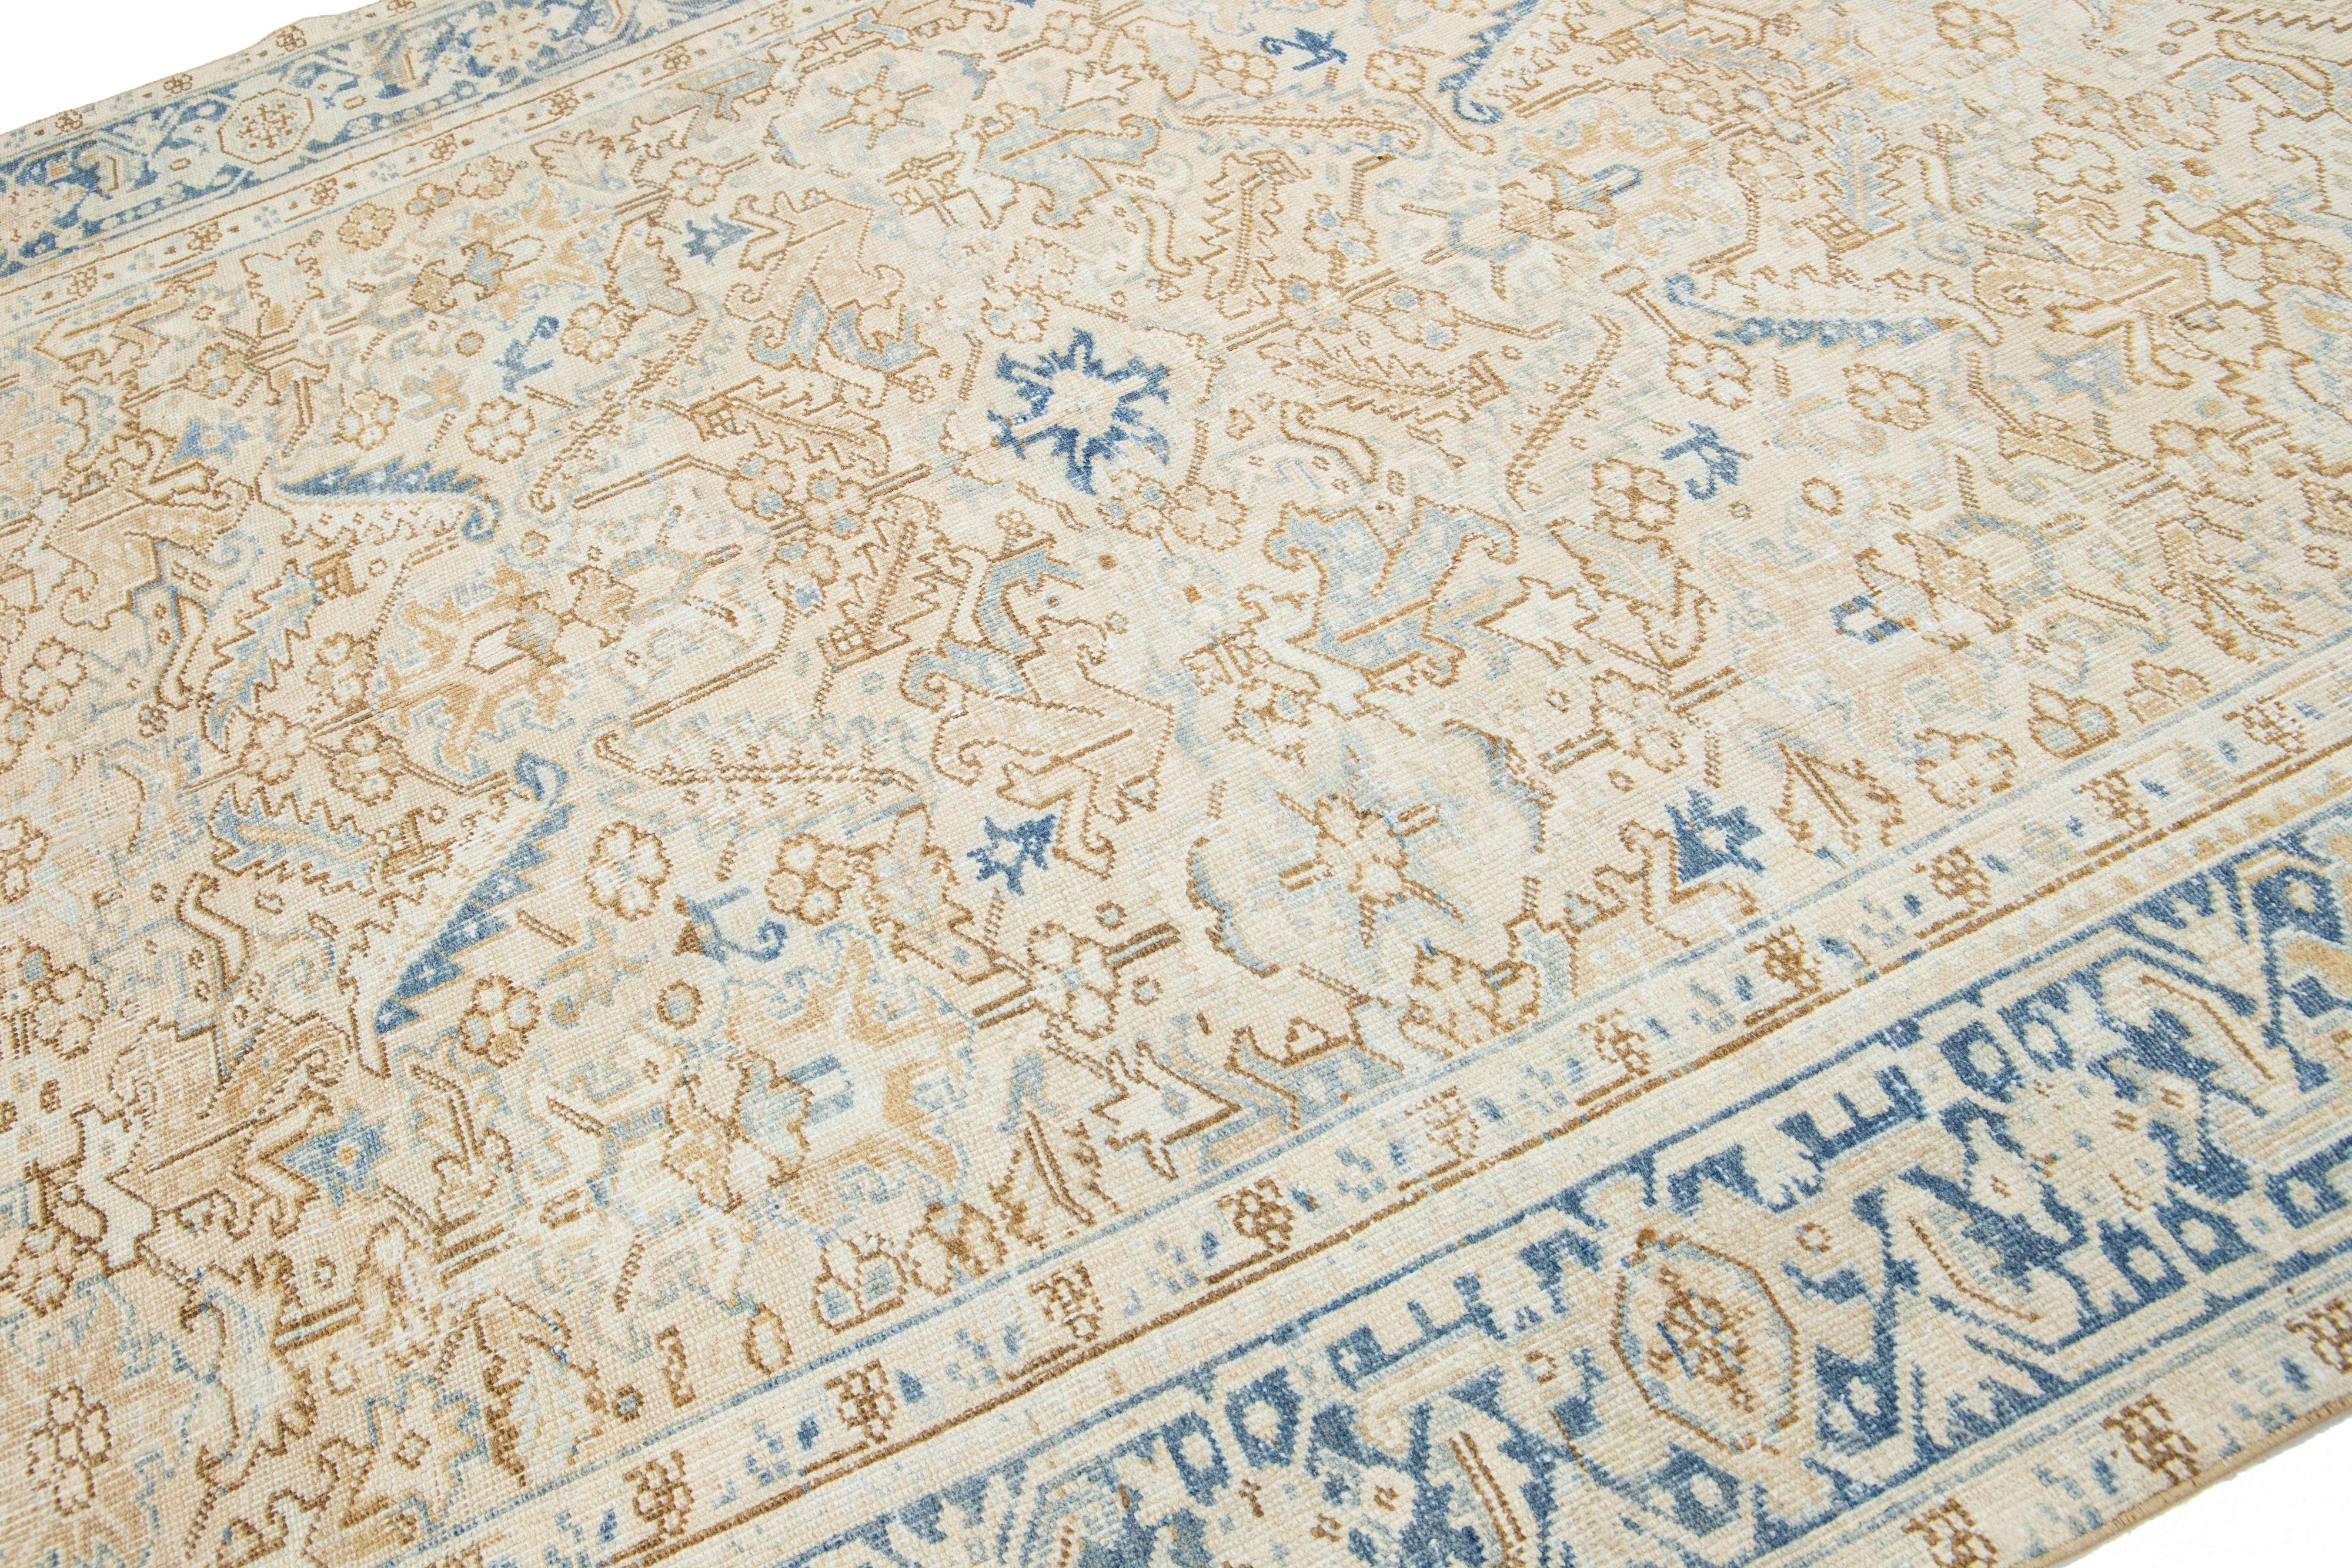 This antique Persian Heriz rug is crafted with hand-knotted wool. The beige-colored field features a captivating allover pattern embellished with shades of blue and brown.

This rug measures 7'3